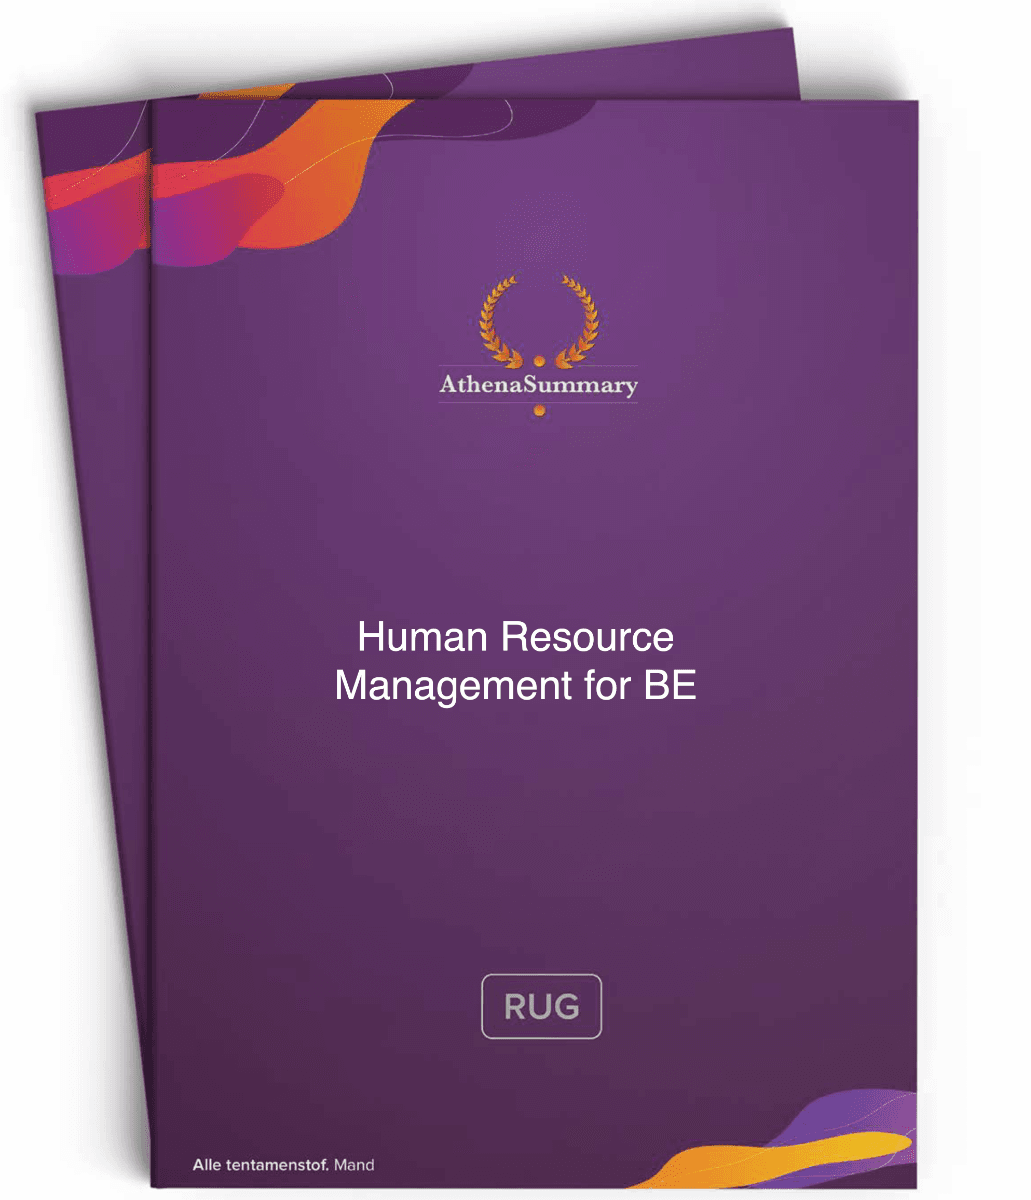 Literature Summary: Human Resource Management for BE